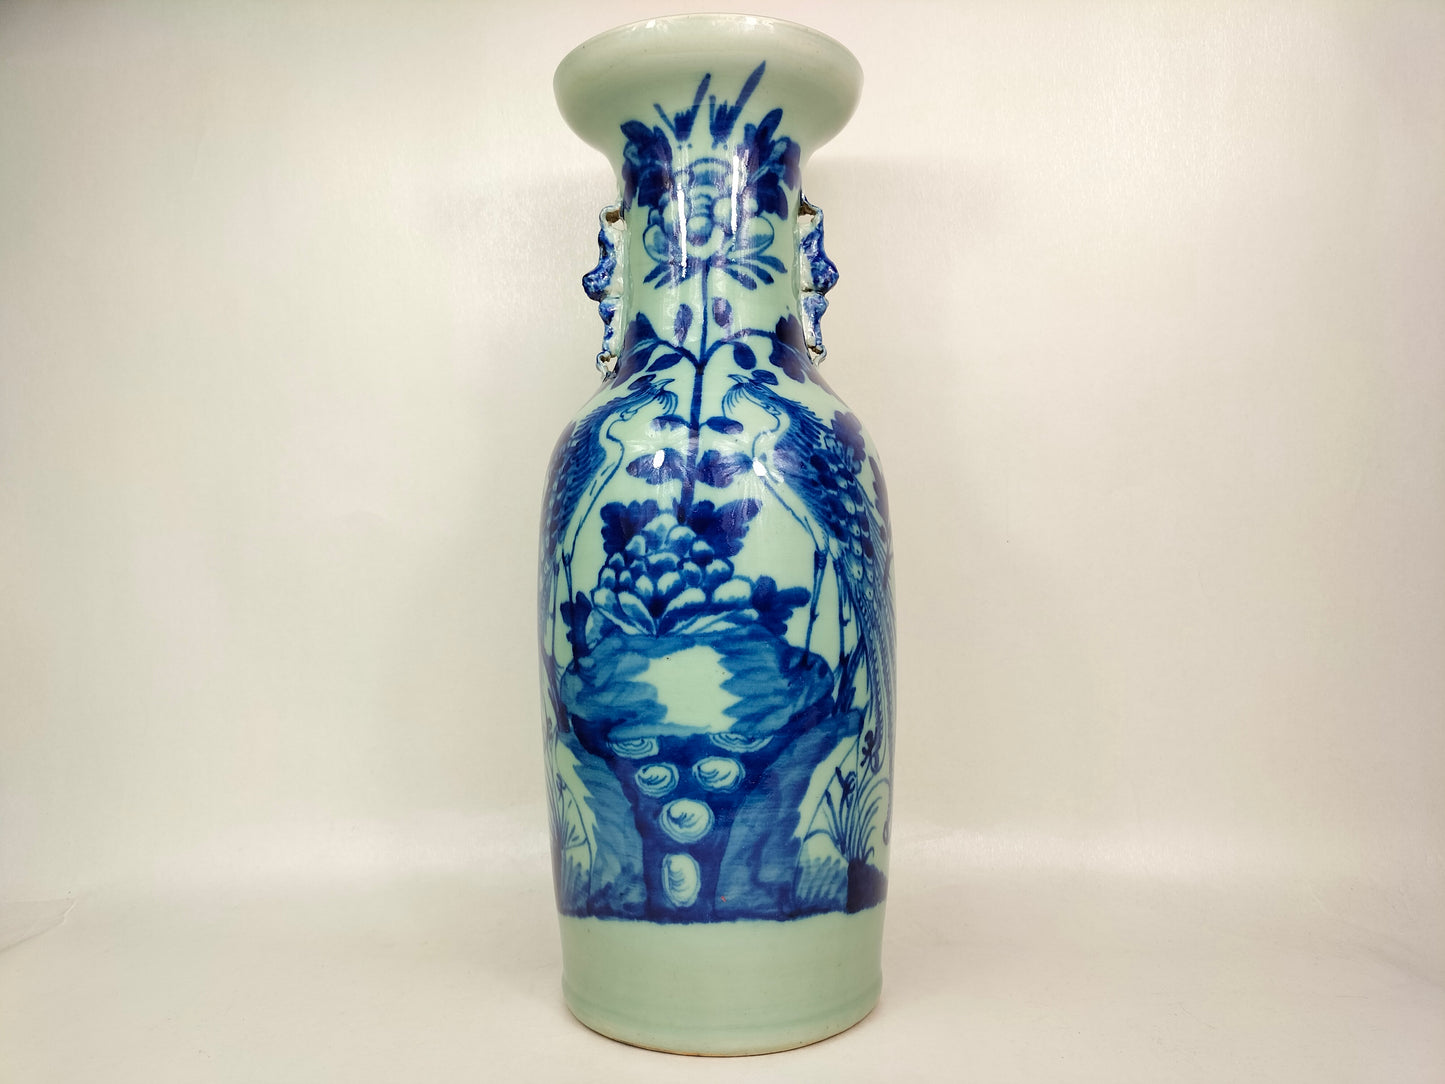 Large antique Chinese 19th century Qing Dynasty celadon blue vase with birds and flowers